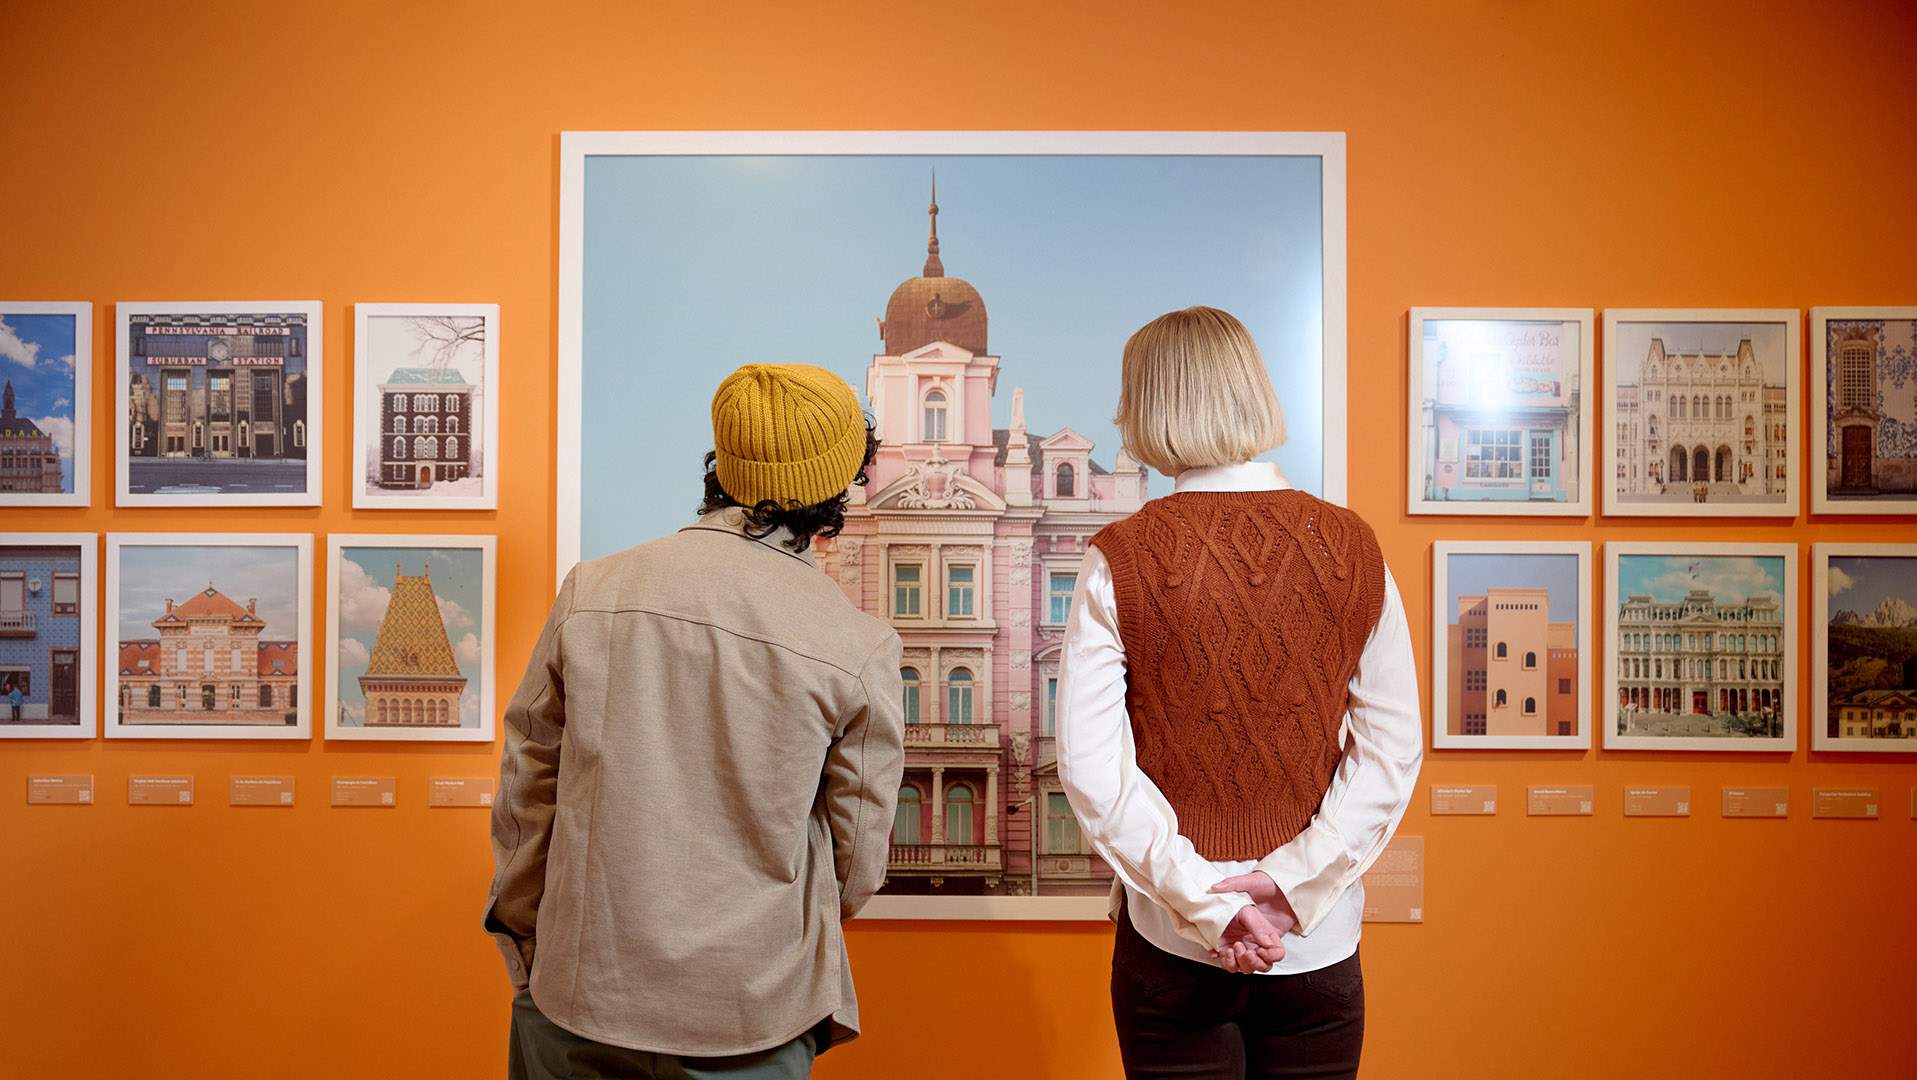 Coming Soon: The Symmetry-Loving 'Accidentally Wes Anderson' Exhibition Is Making Its Australian Debut in Melbourne